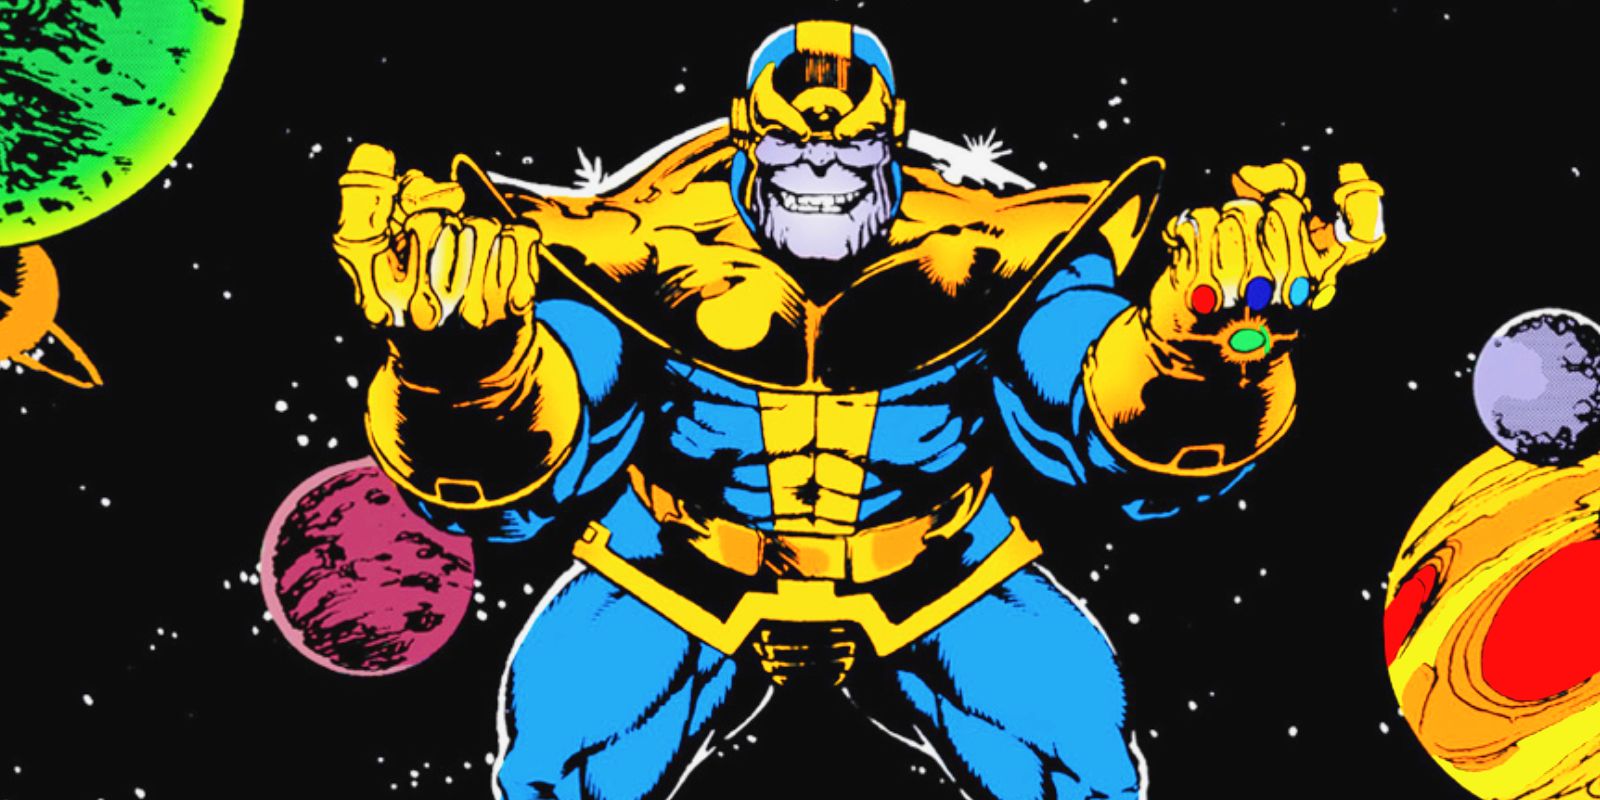 Thanos with the Infinity Gauntlet in George Pérez art.